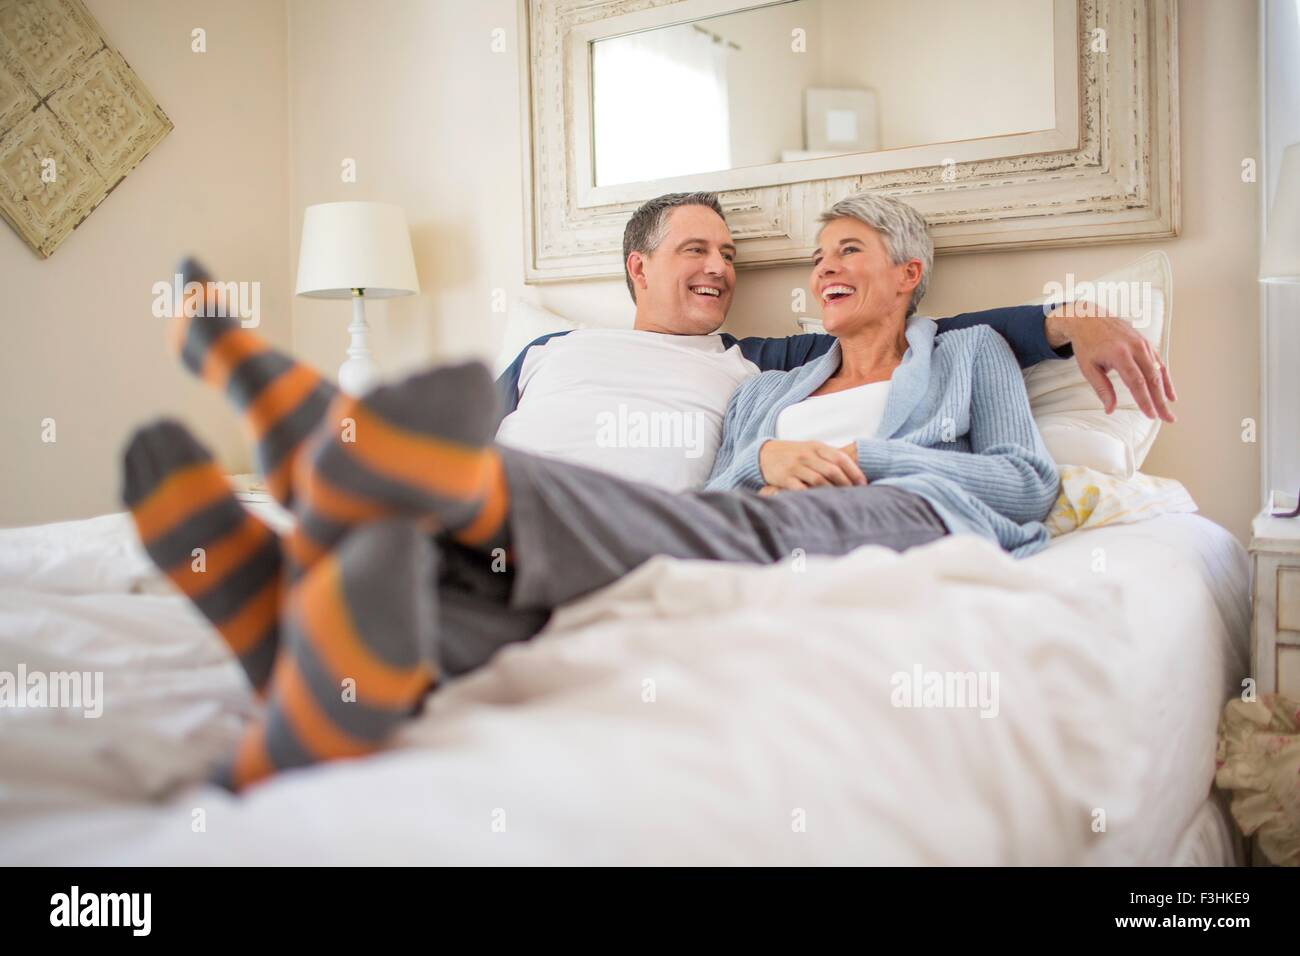 Mature couple chatting and relaxing on bed Stock Photo